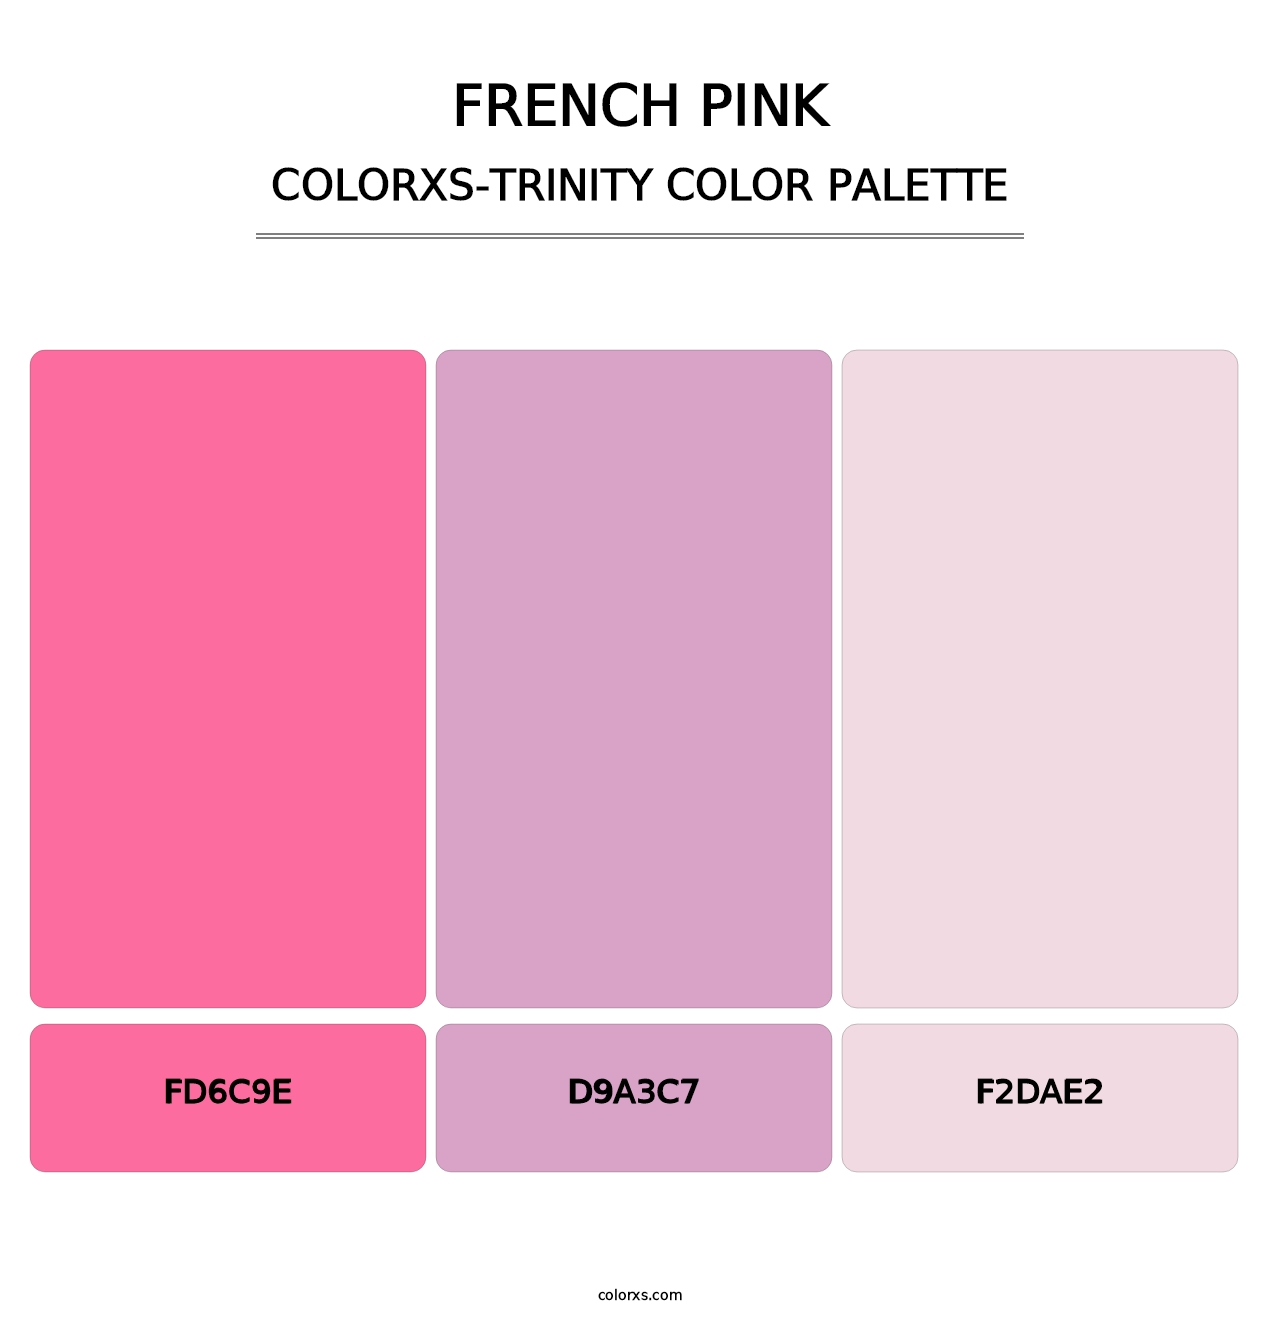 French Pink - Colorxs Trinity Palette